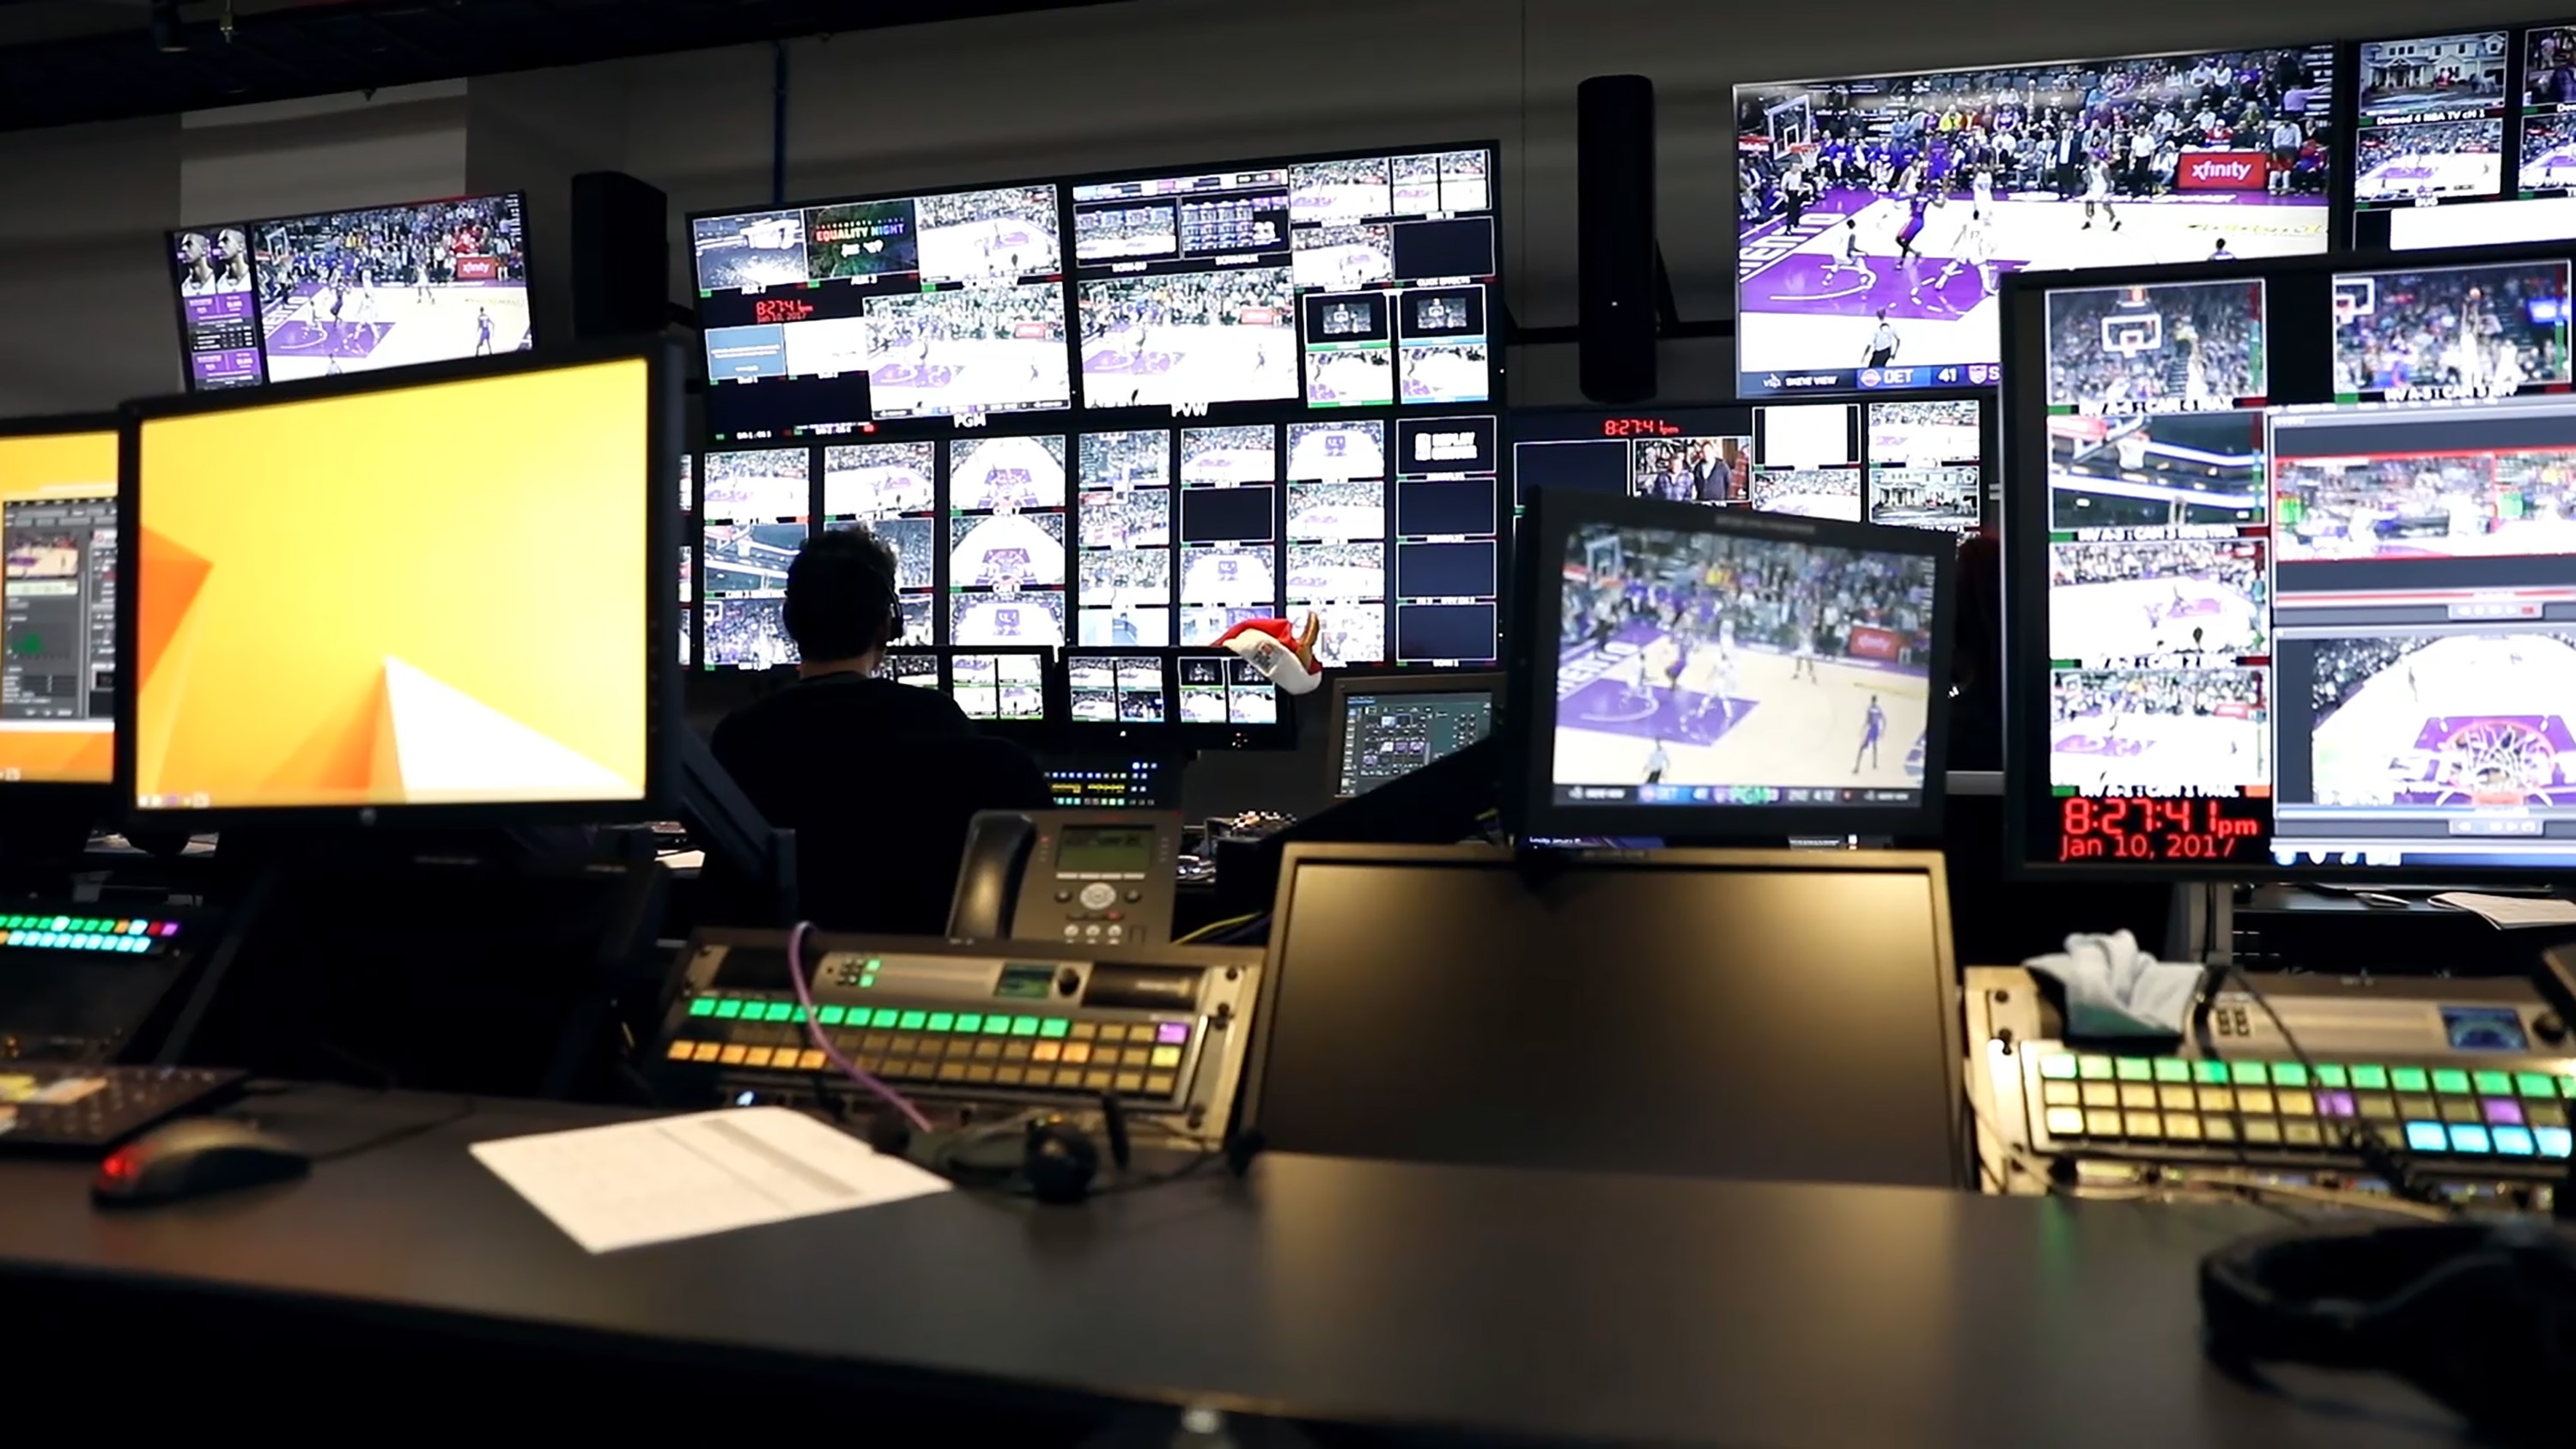 From the archives: Tech shines through at Sacramento's new Golden 1 Center  (2017) - Stadium Tech Report